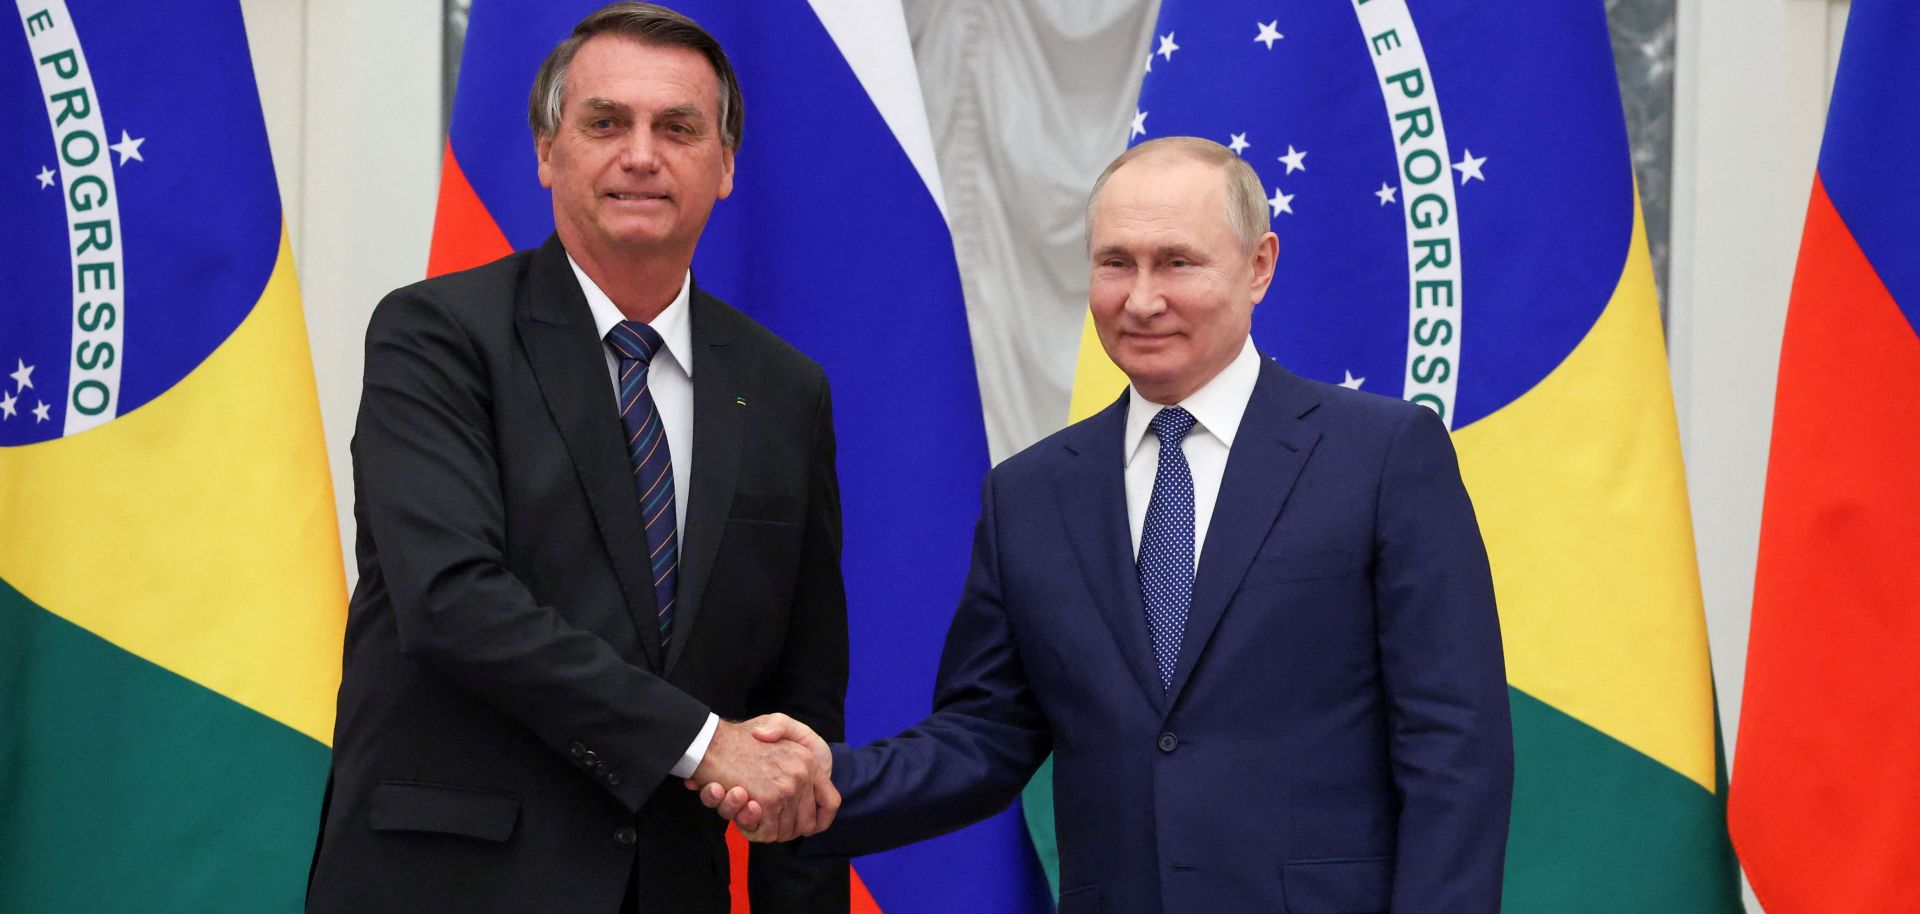 Russian President Vladimir Putin (right) shakes hands with Brazilian President Jair Bolsonaro during a joint press conference after holding a meeting in Moscow on Feb. 16, 2022. 